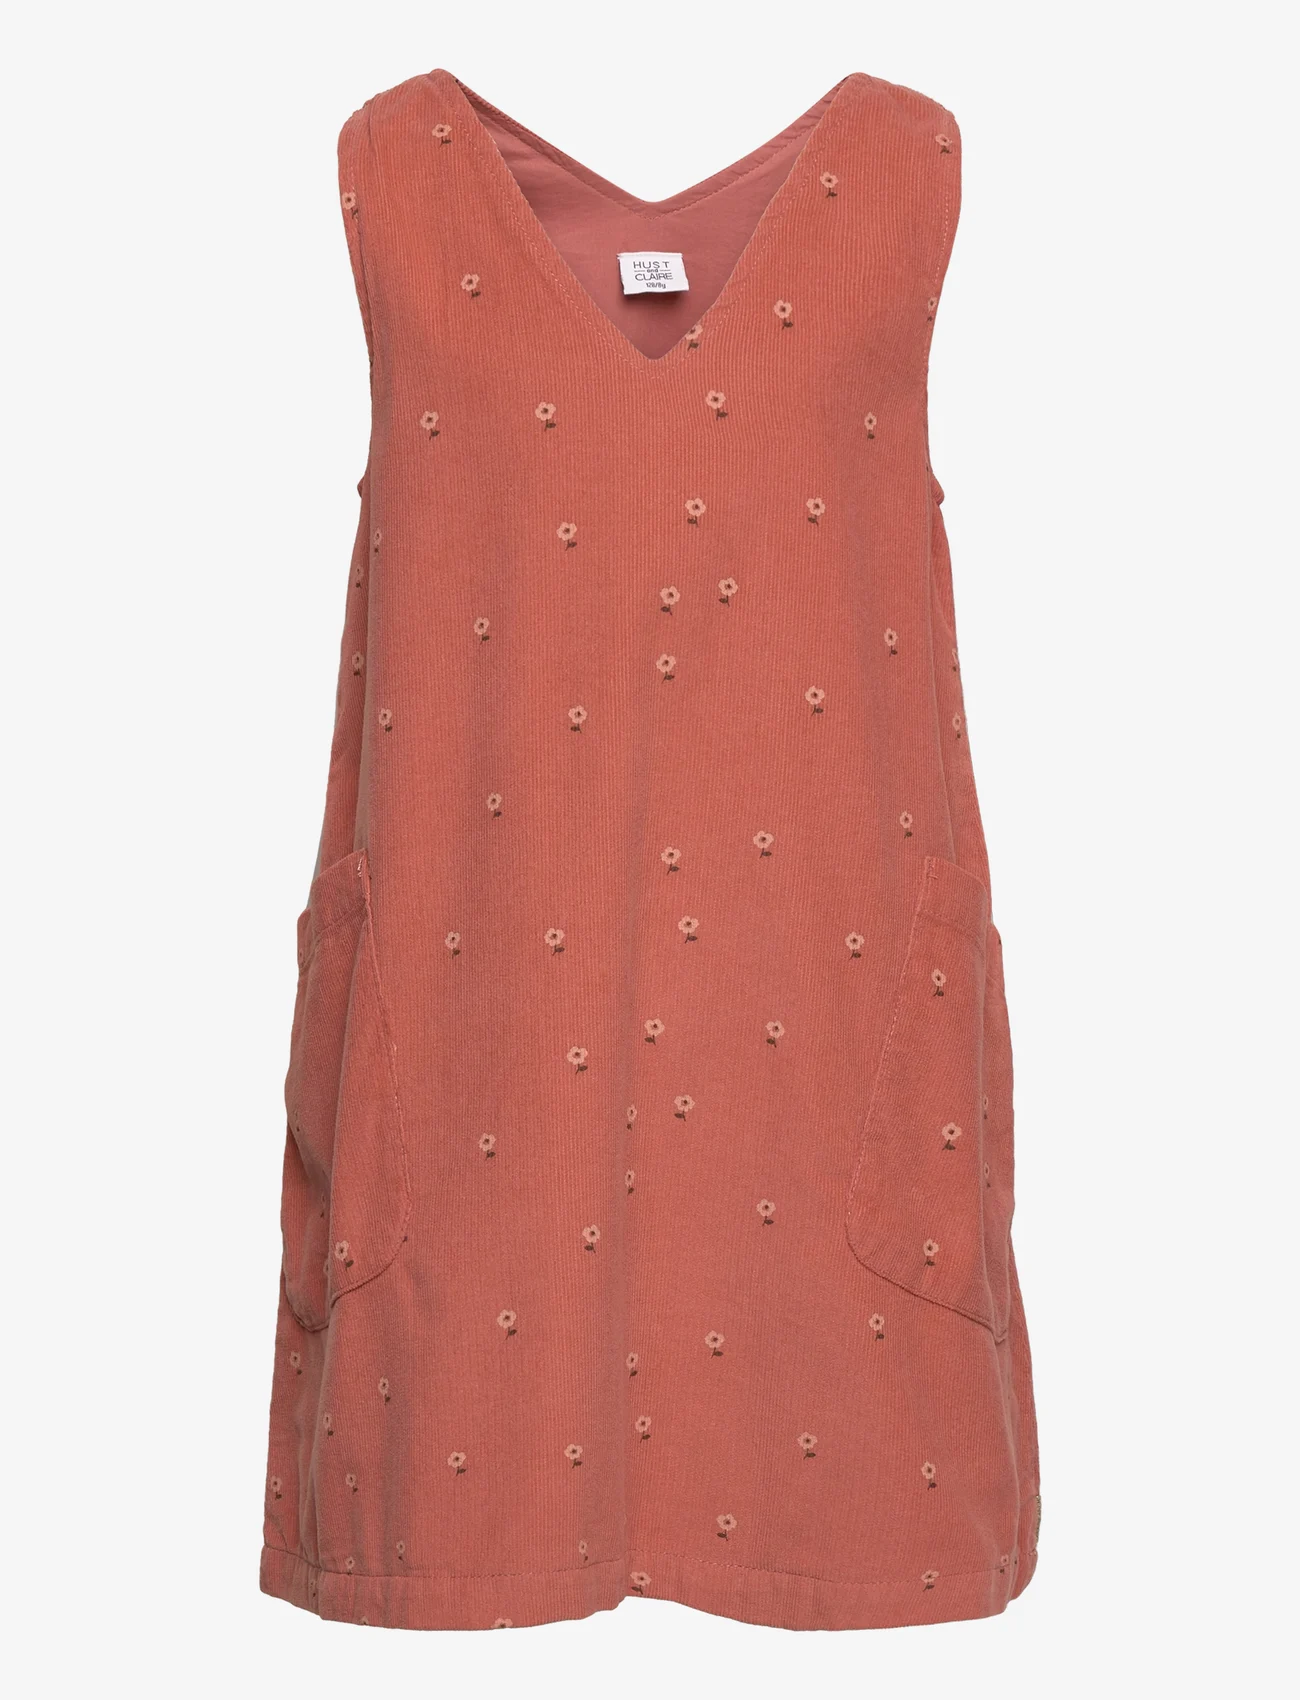 Hust & Claire - Kida - Dress - sleeveless casual dresses - red clay - 0